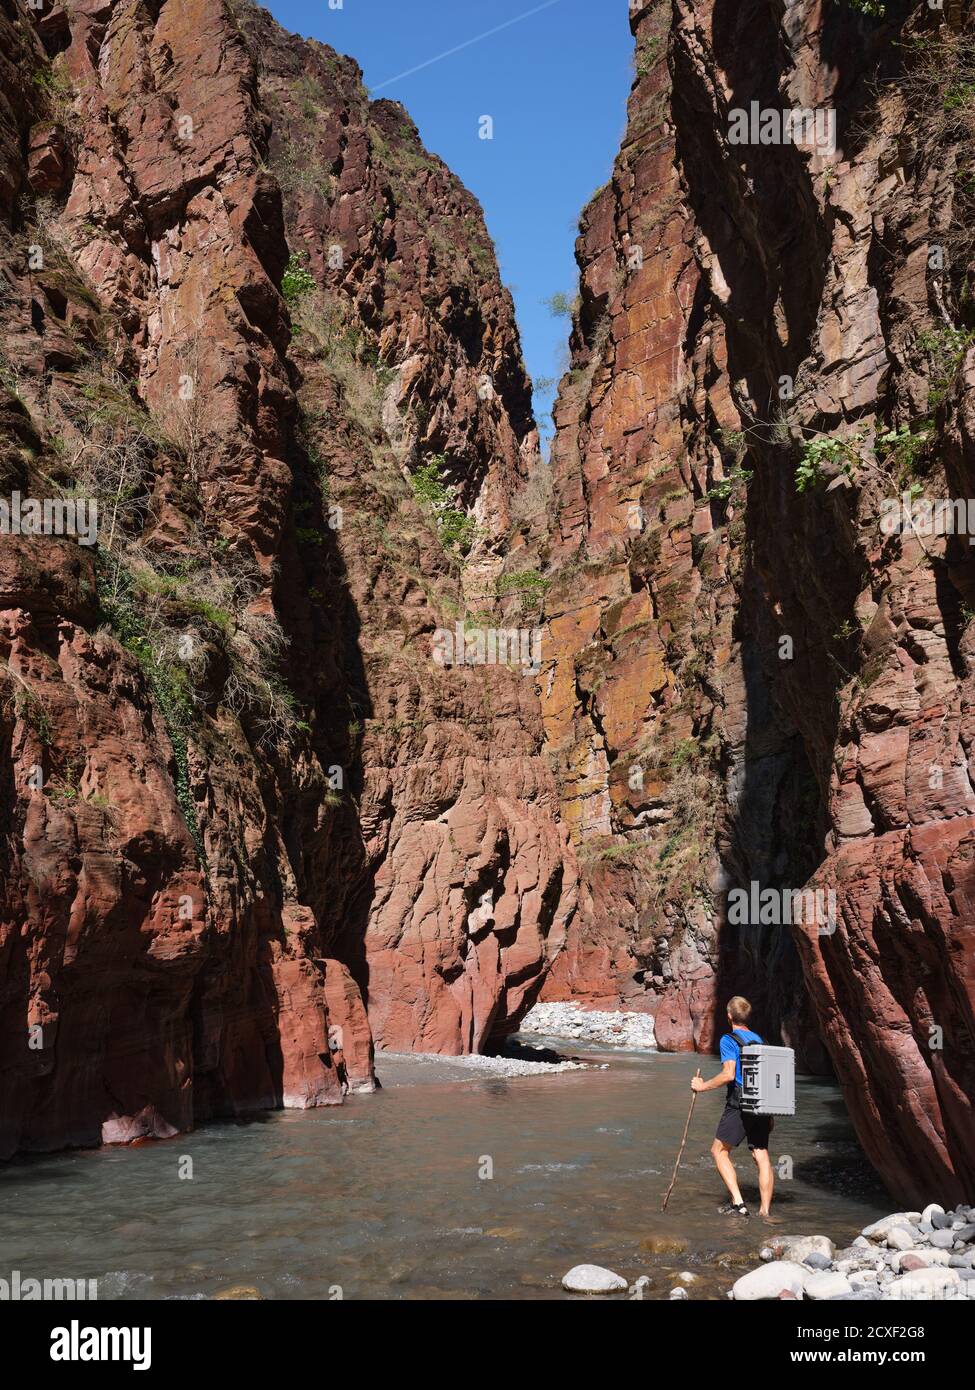 Hiker wading the Var River with a waterproof hard case backpack at the bottom of a deep red canyon. Daluis Gorge, Guillaumes, Alpes-Maritimes, France. Stock Photo